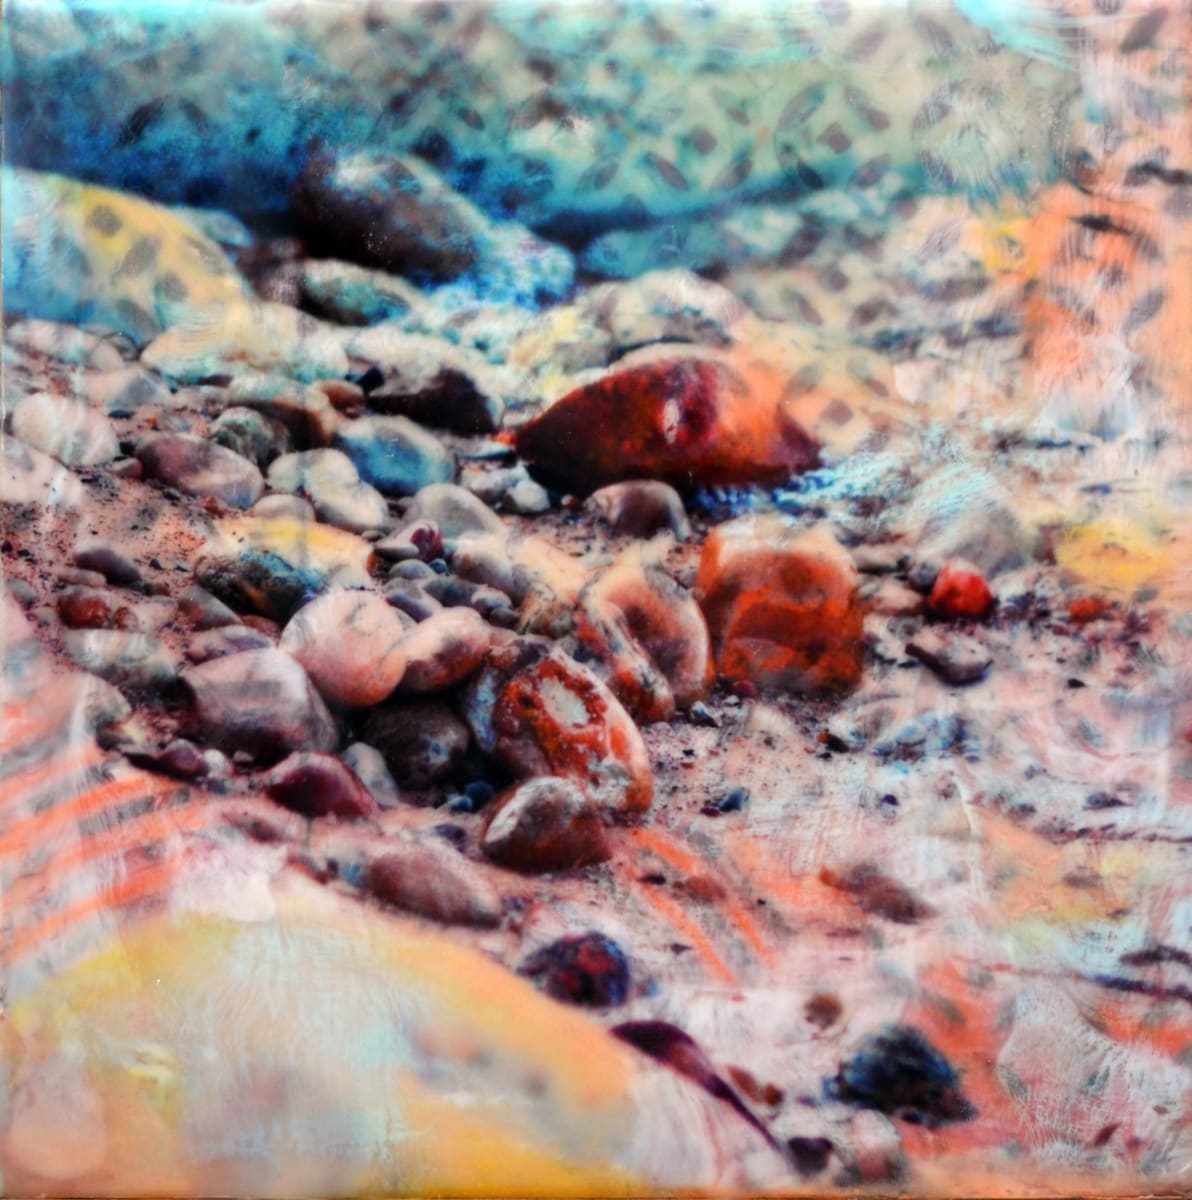 Rock Candy by Kristianne Tefft  Image: This artwork was created by torch fusing and layering clear encaustic medium, encaustic paints, pan pastels and by burnishing an image of rocks taken in Detour, MI.